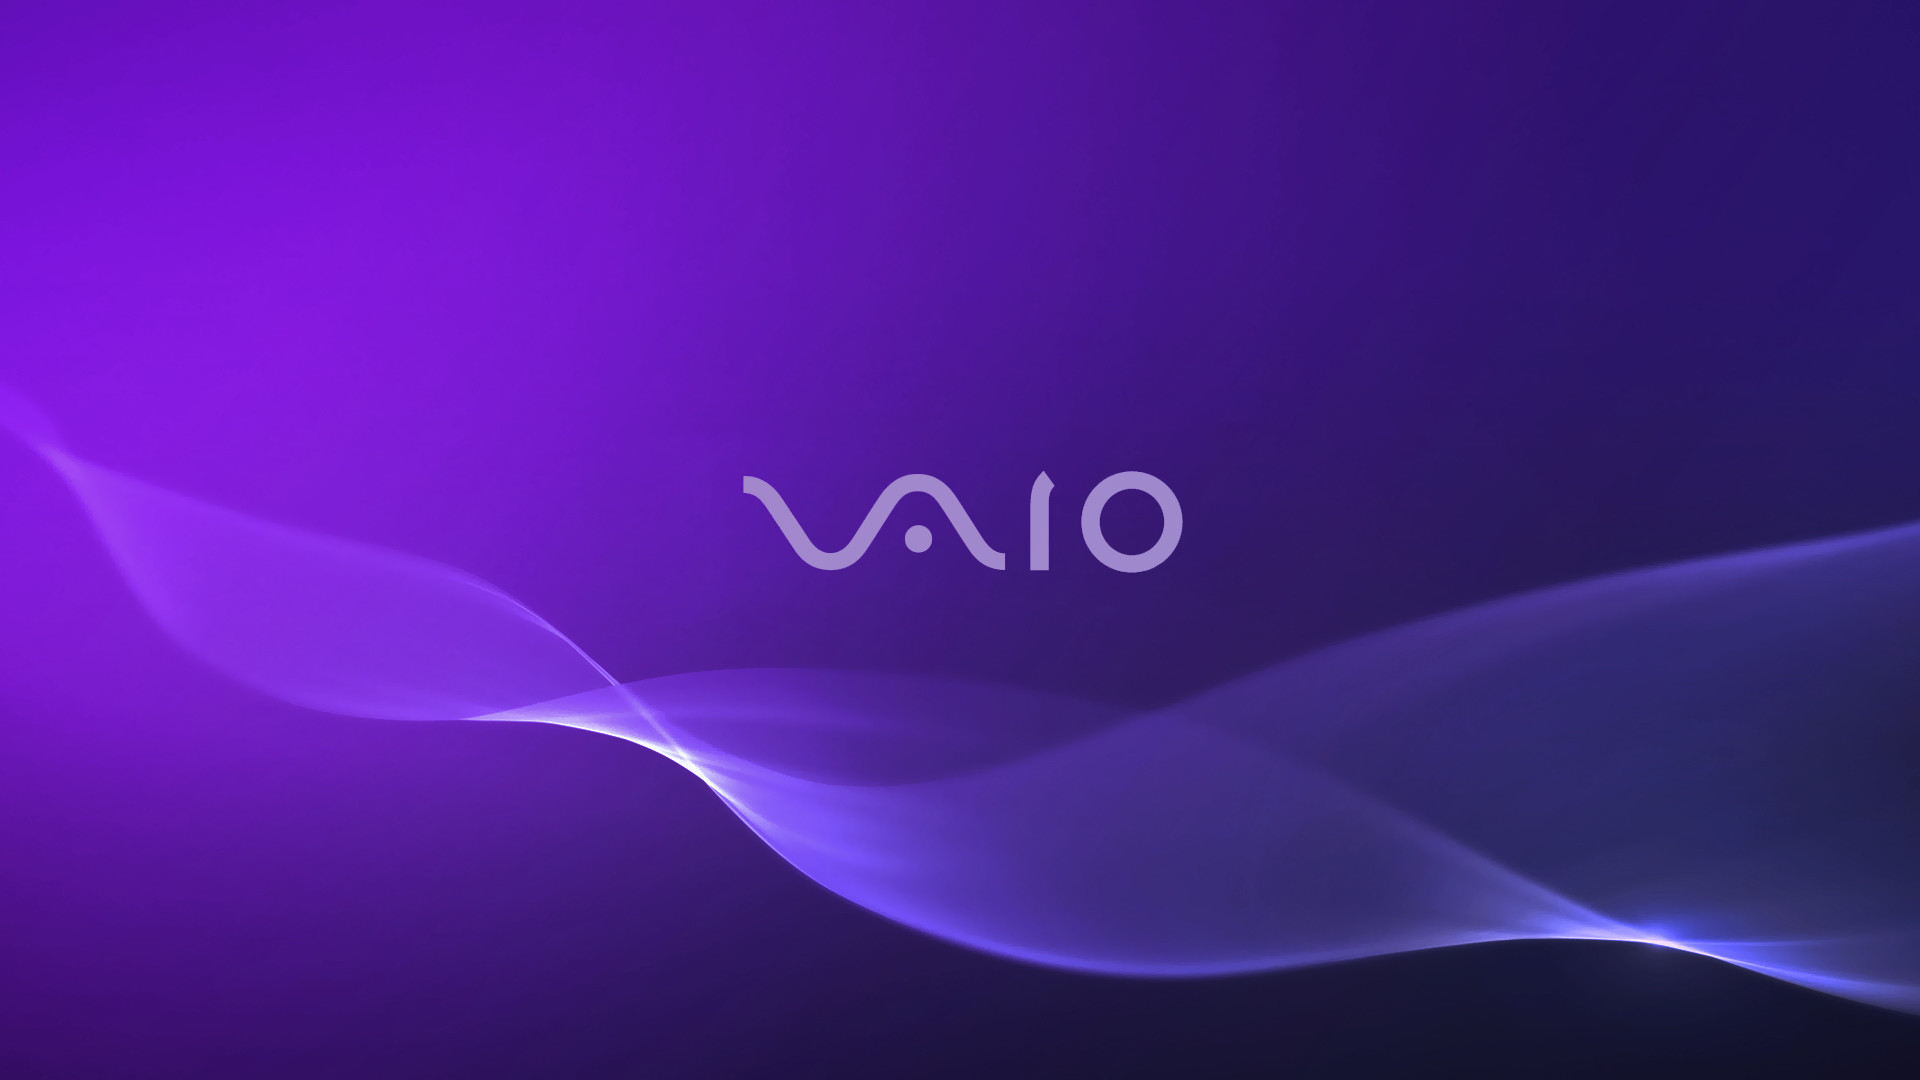 1920x1080 Pin Vaio Fan Art Hd And Top Widescreen From Wallpaper With 1366x768 on  